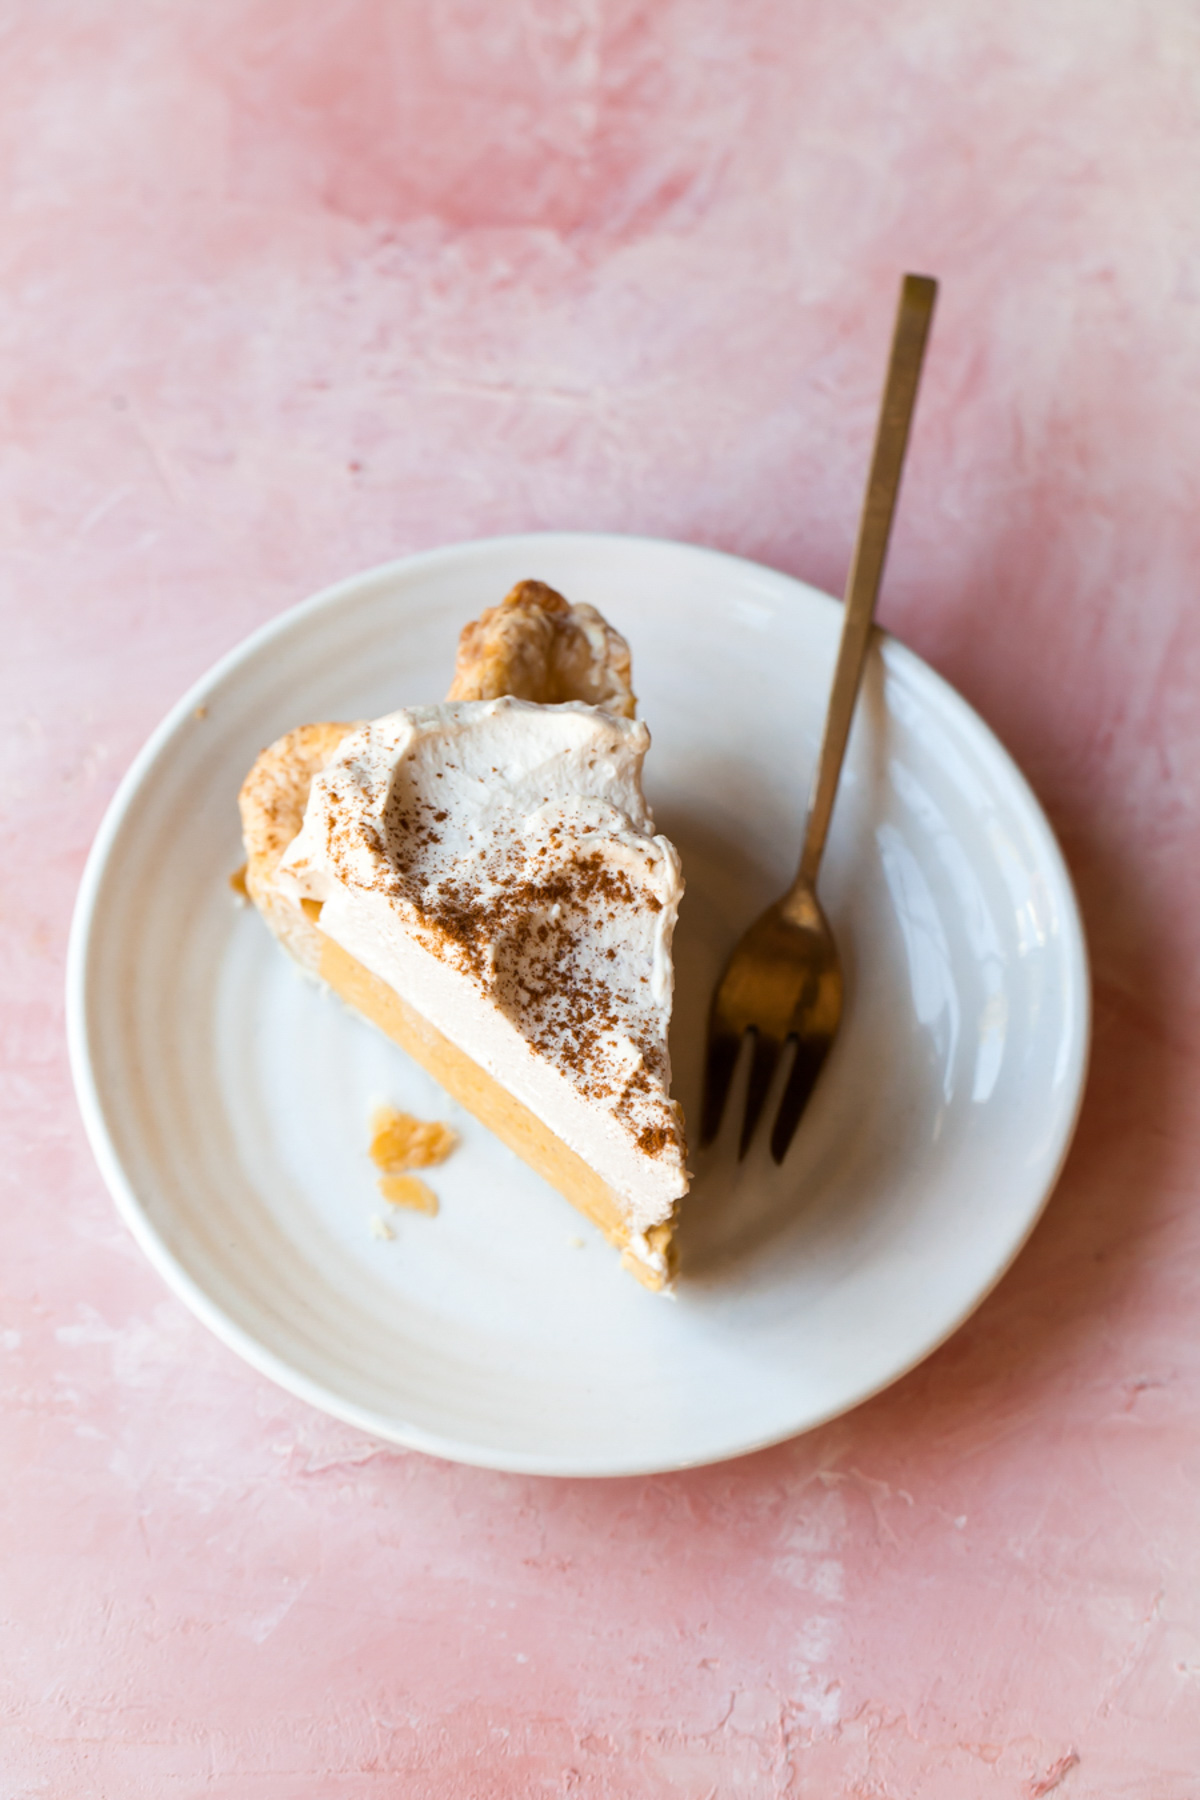 A slice of pumpkin chiffon pie with whipped cream on top